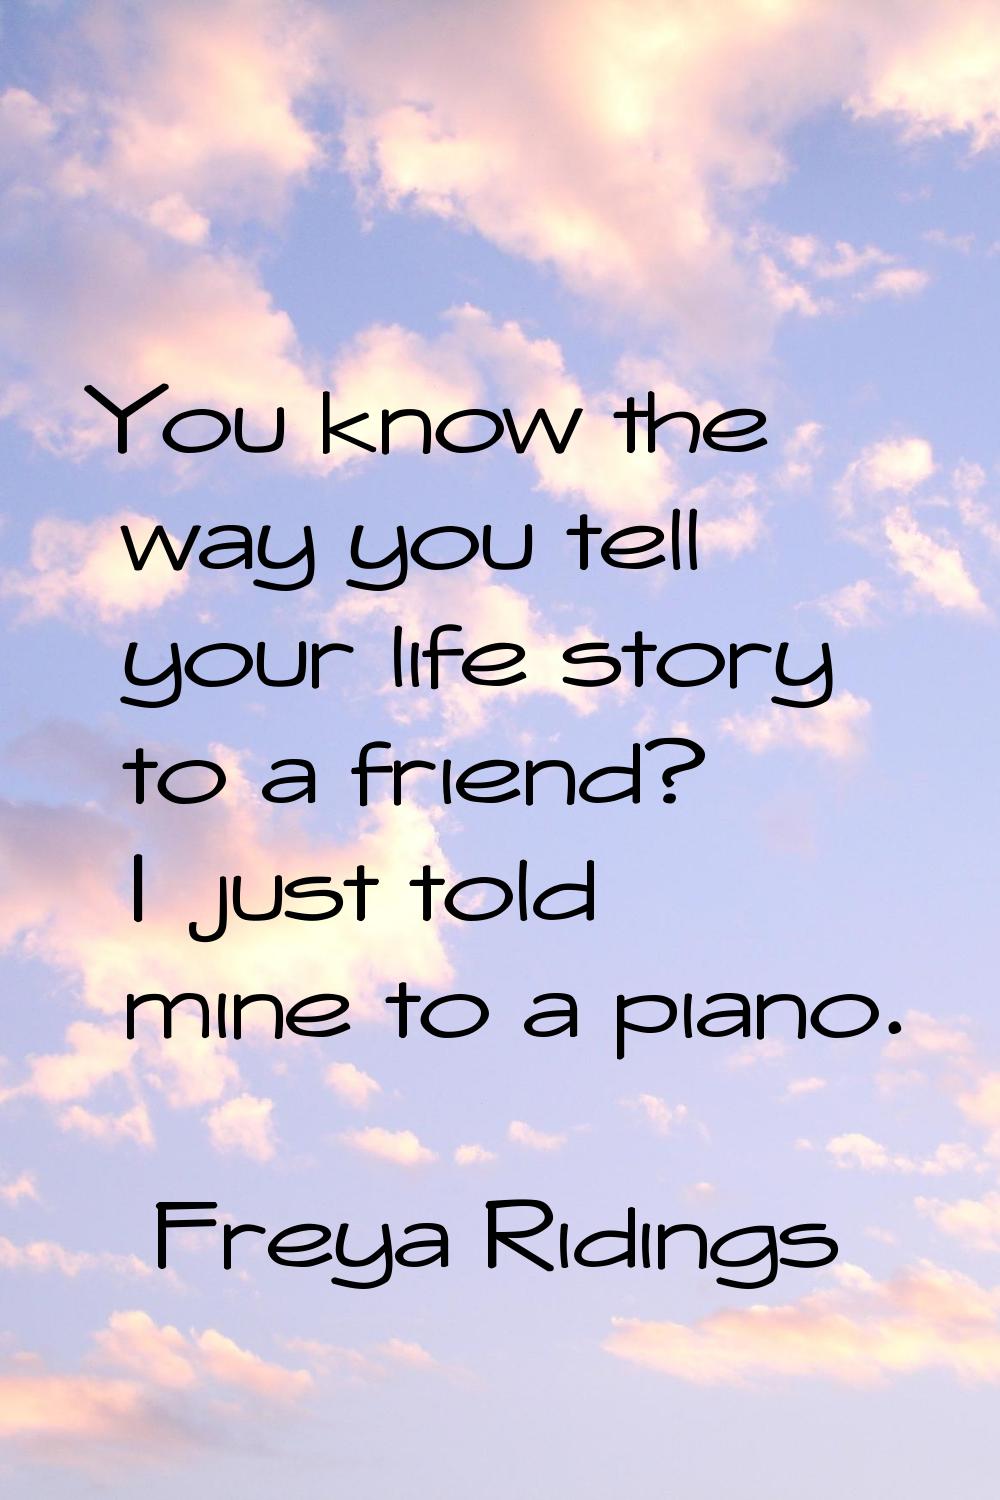 You know the way you tell your life story to a friend? I just told mine to a piano.